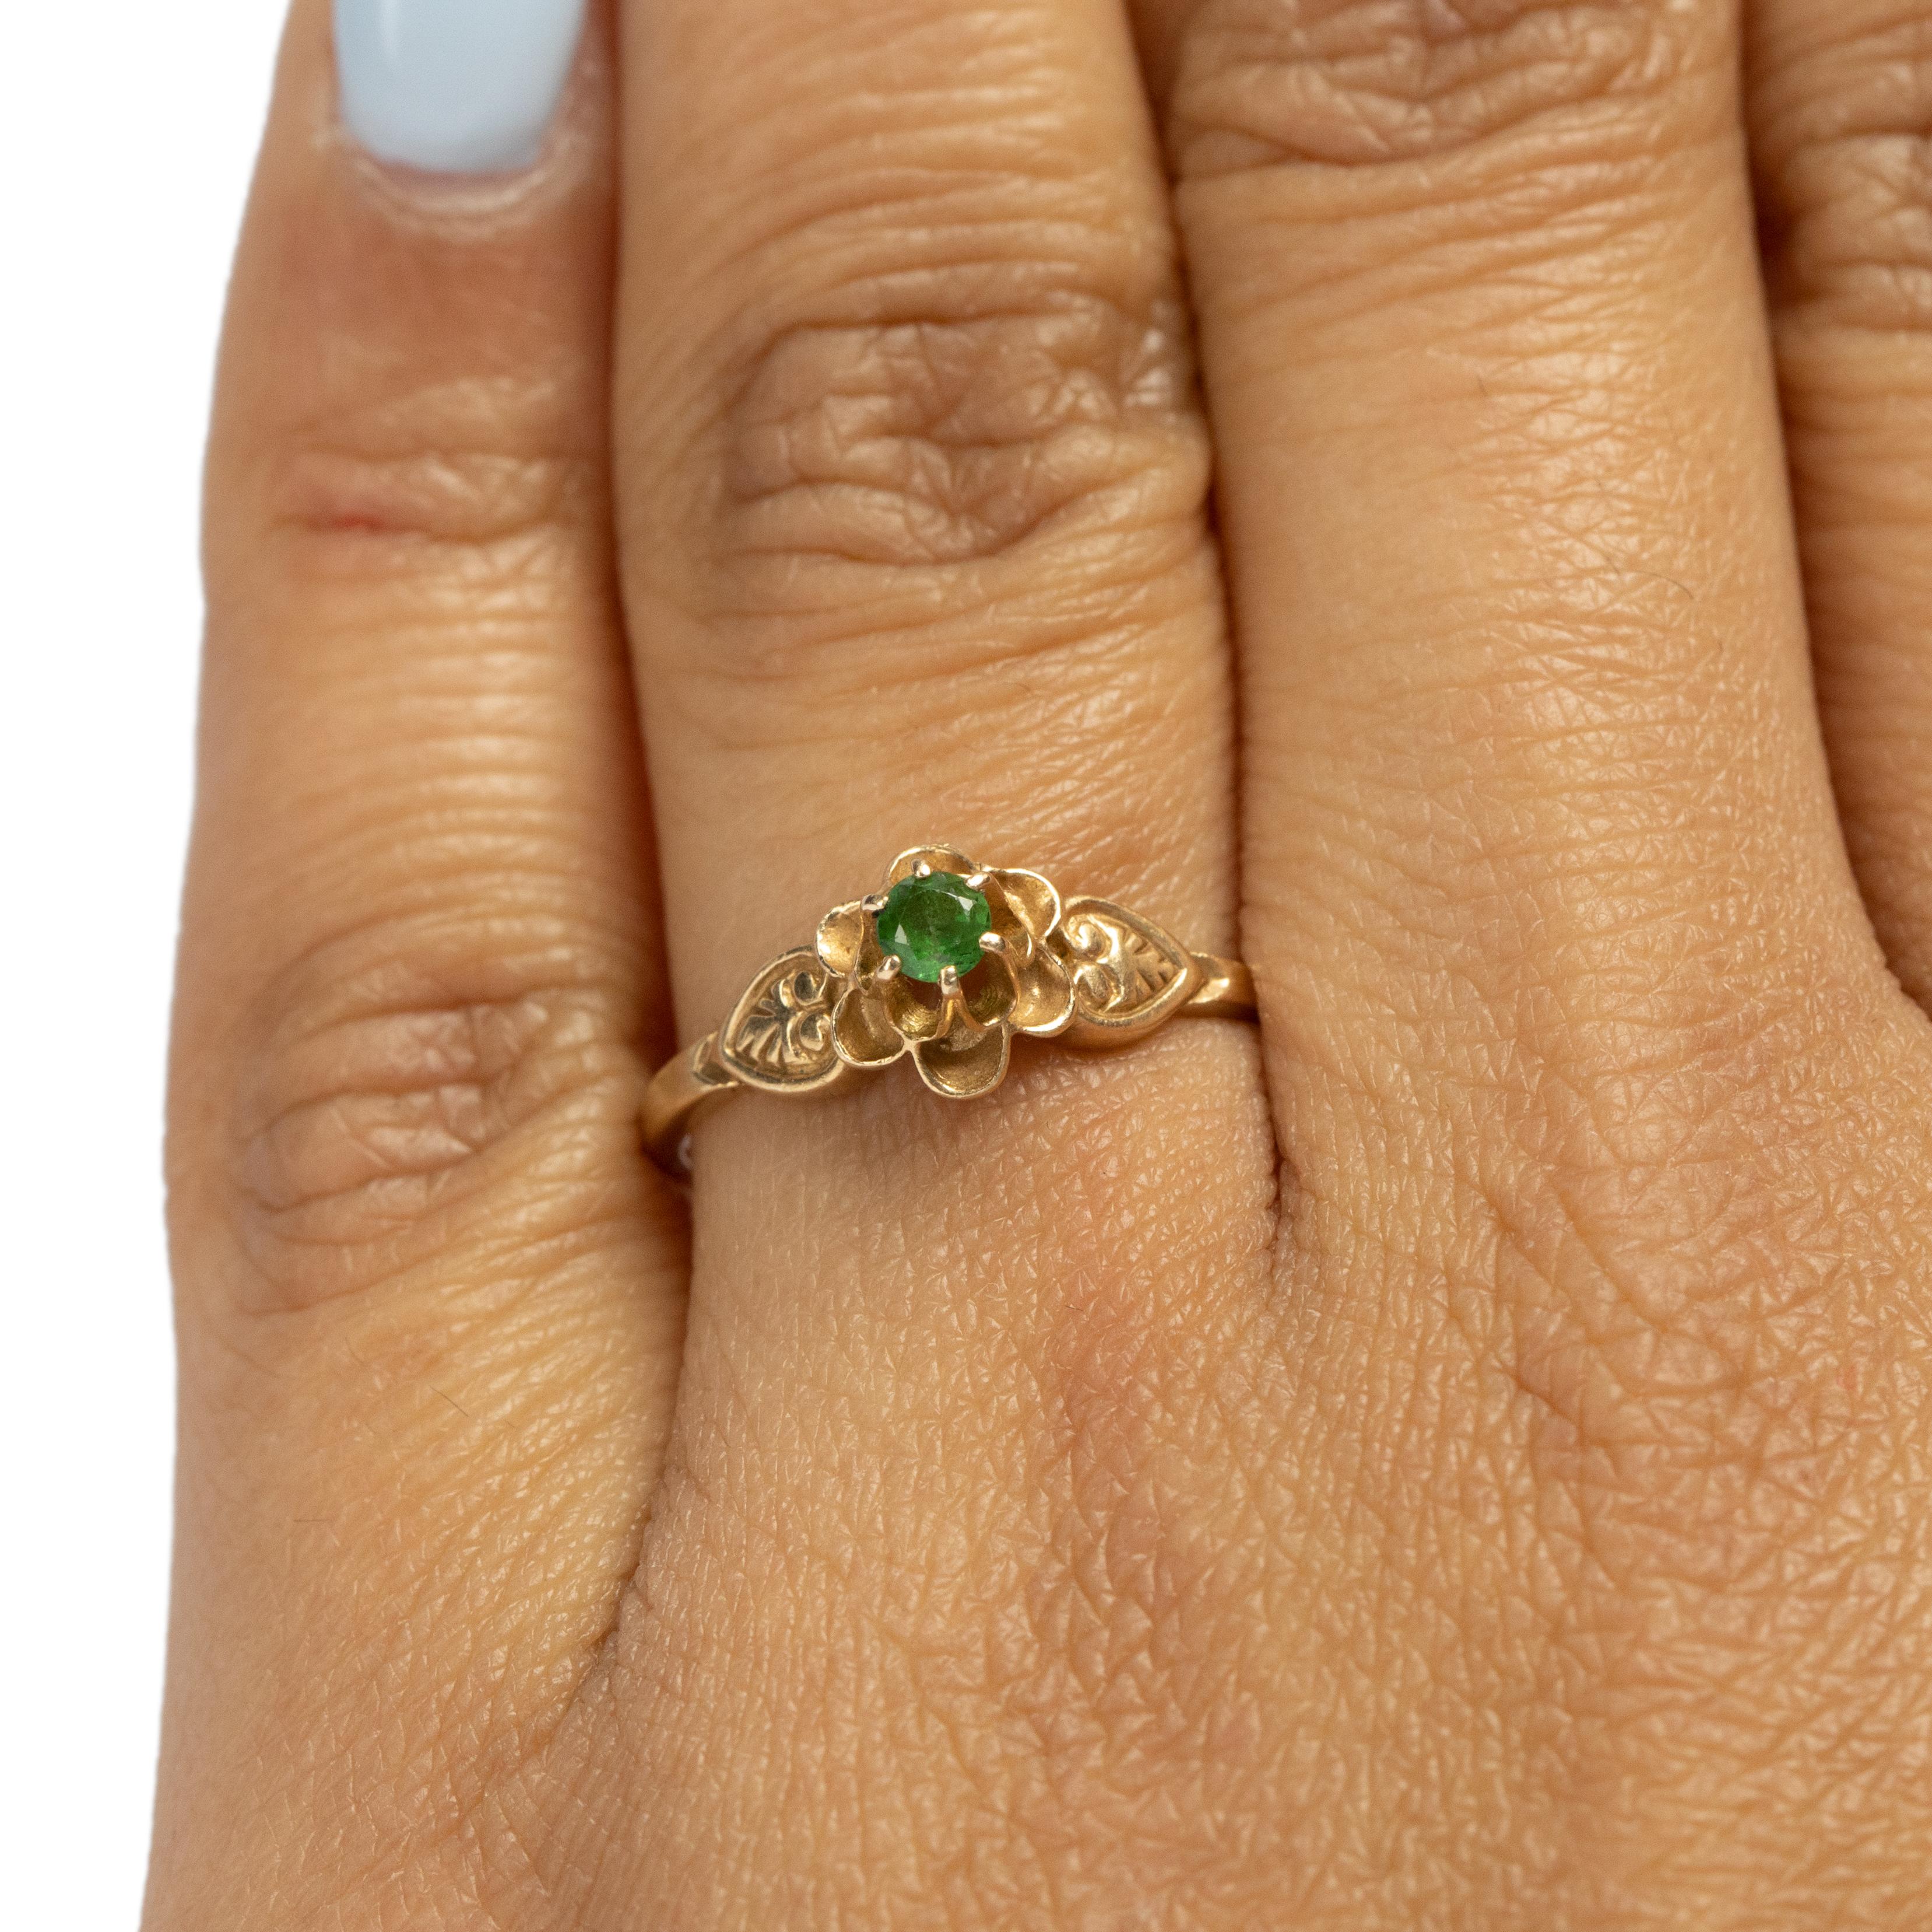 Women's Art Deco 14K Yellow Gold Floral Vintage Ring with Leaf Carving and Emerald Ring